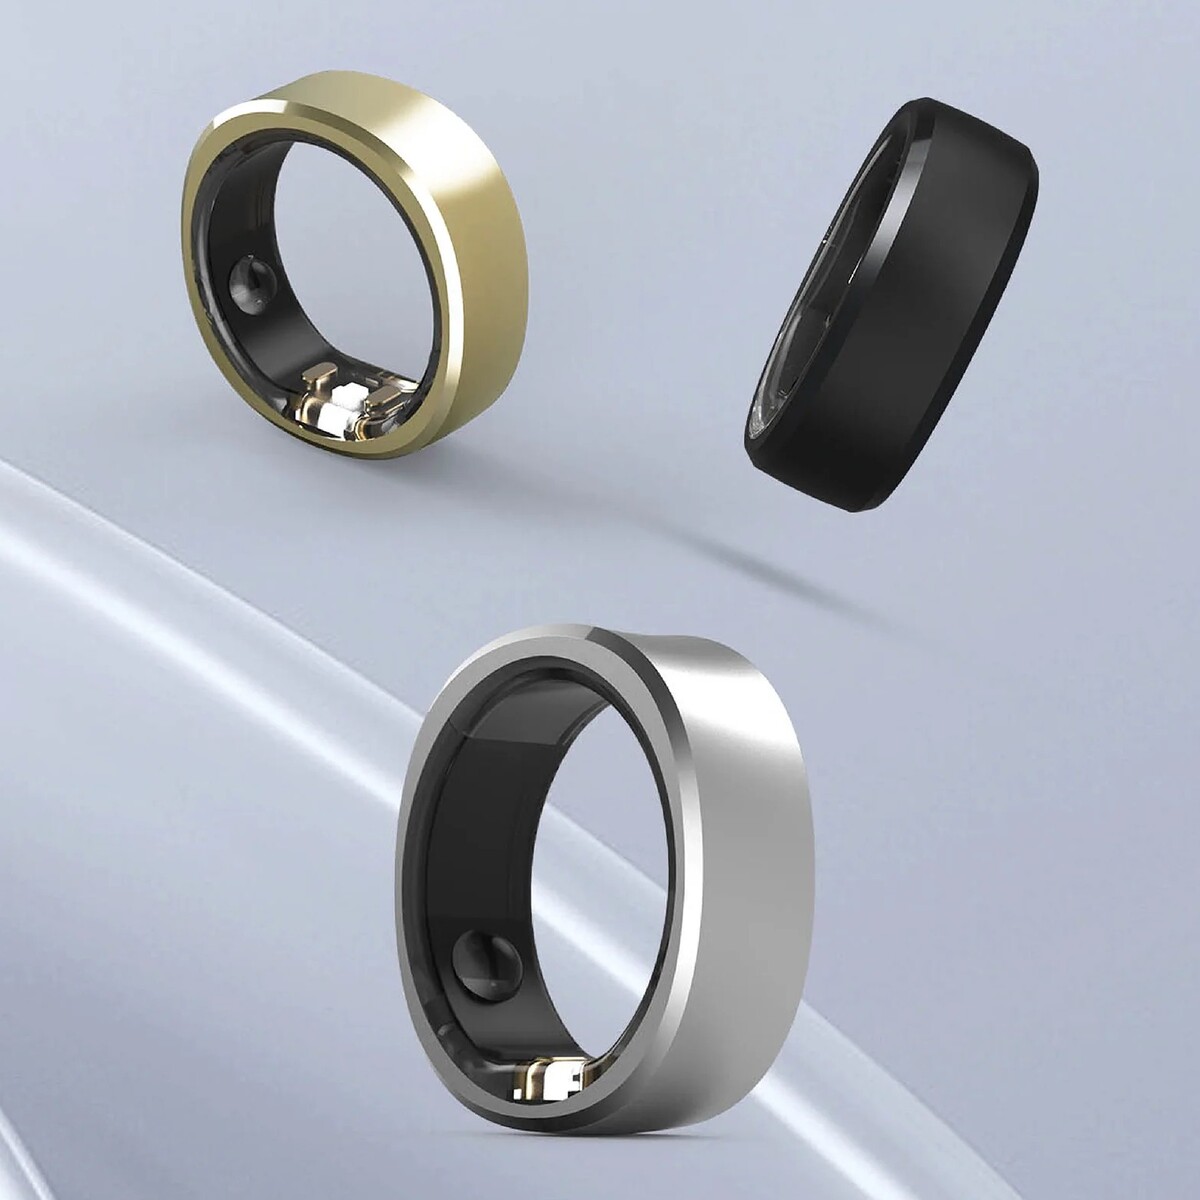 RingConn Smart Ring Review in 2024